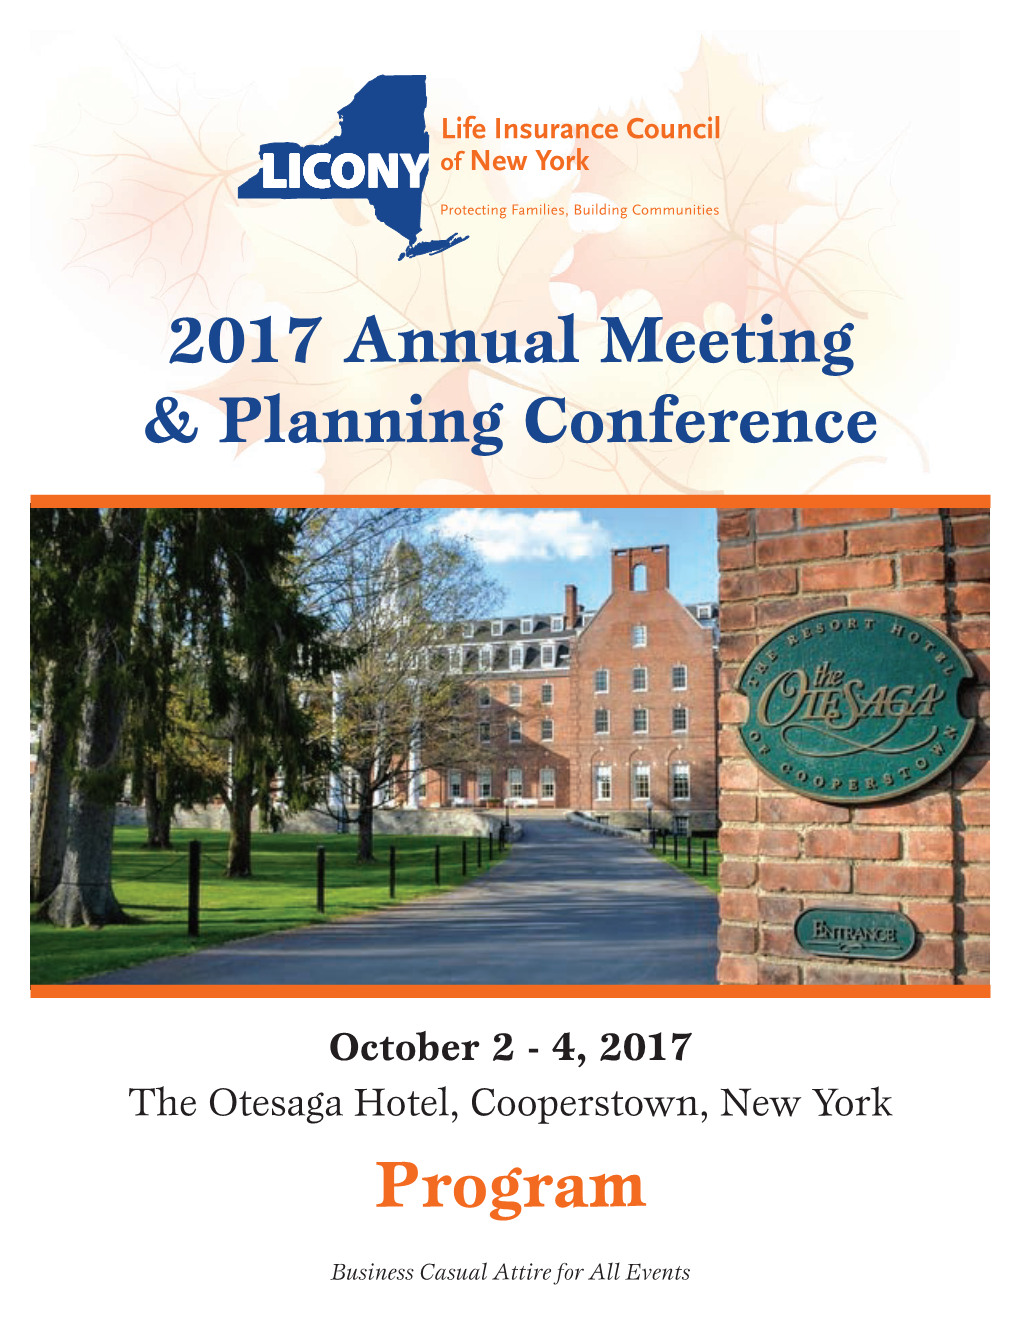 2017 Annual Meeting & Planning Conference Program